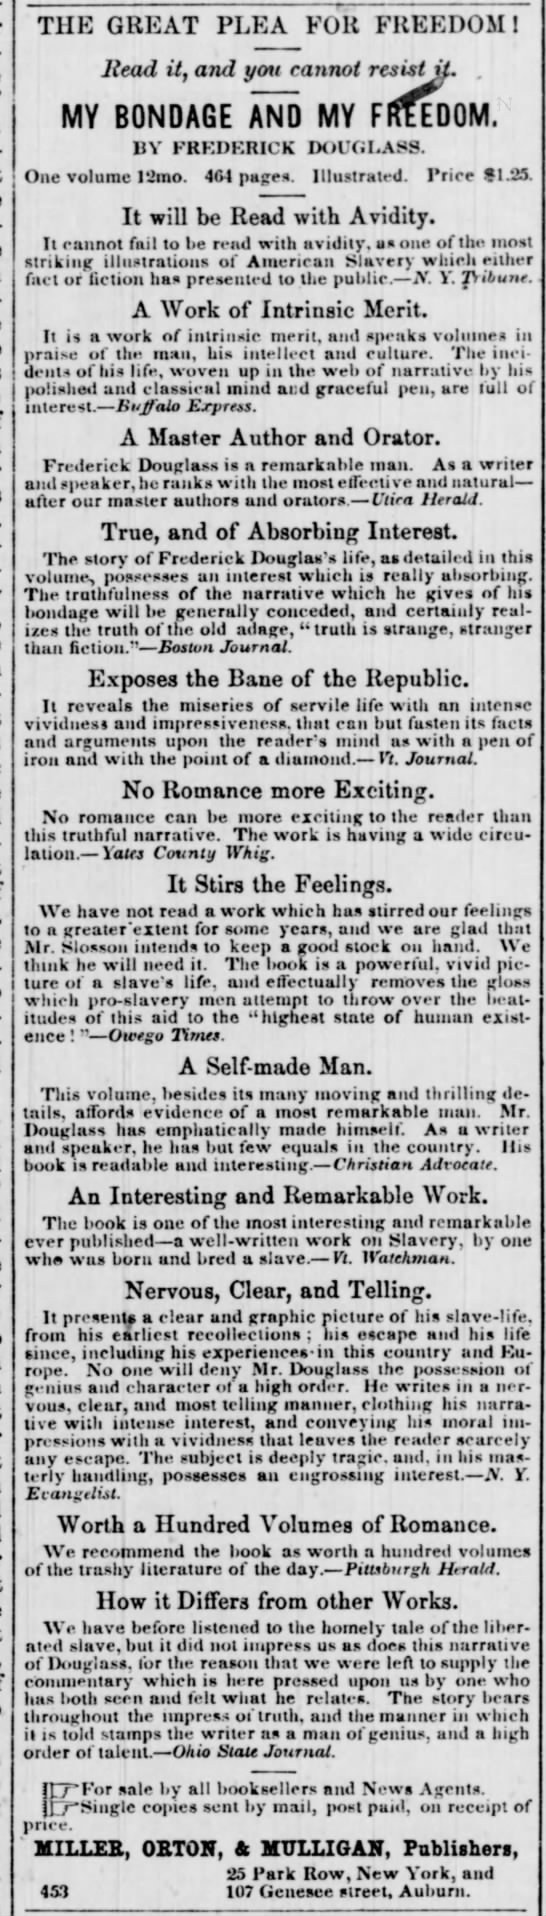 1855 newspaper ad with reviews of "My Bondage and My Freedom" by Frederick Douglass - 